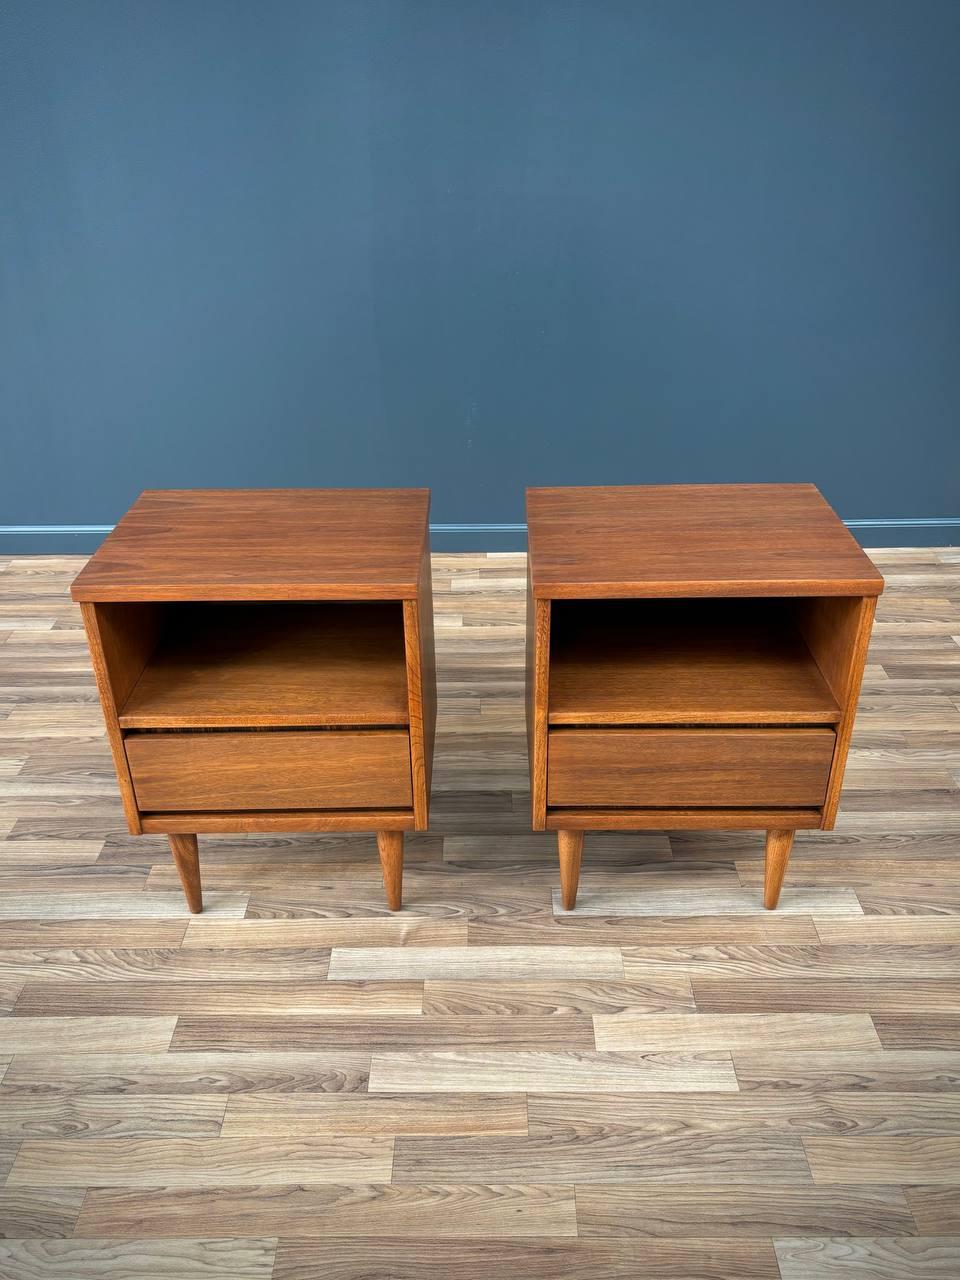 Newly Refinished - Pair of Mid-Century Modern Walnut Night Stands with Bookcase In Excellent Condition For Sale In Los Angeles, CA